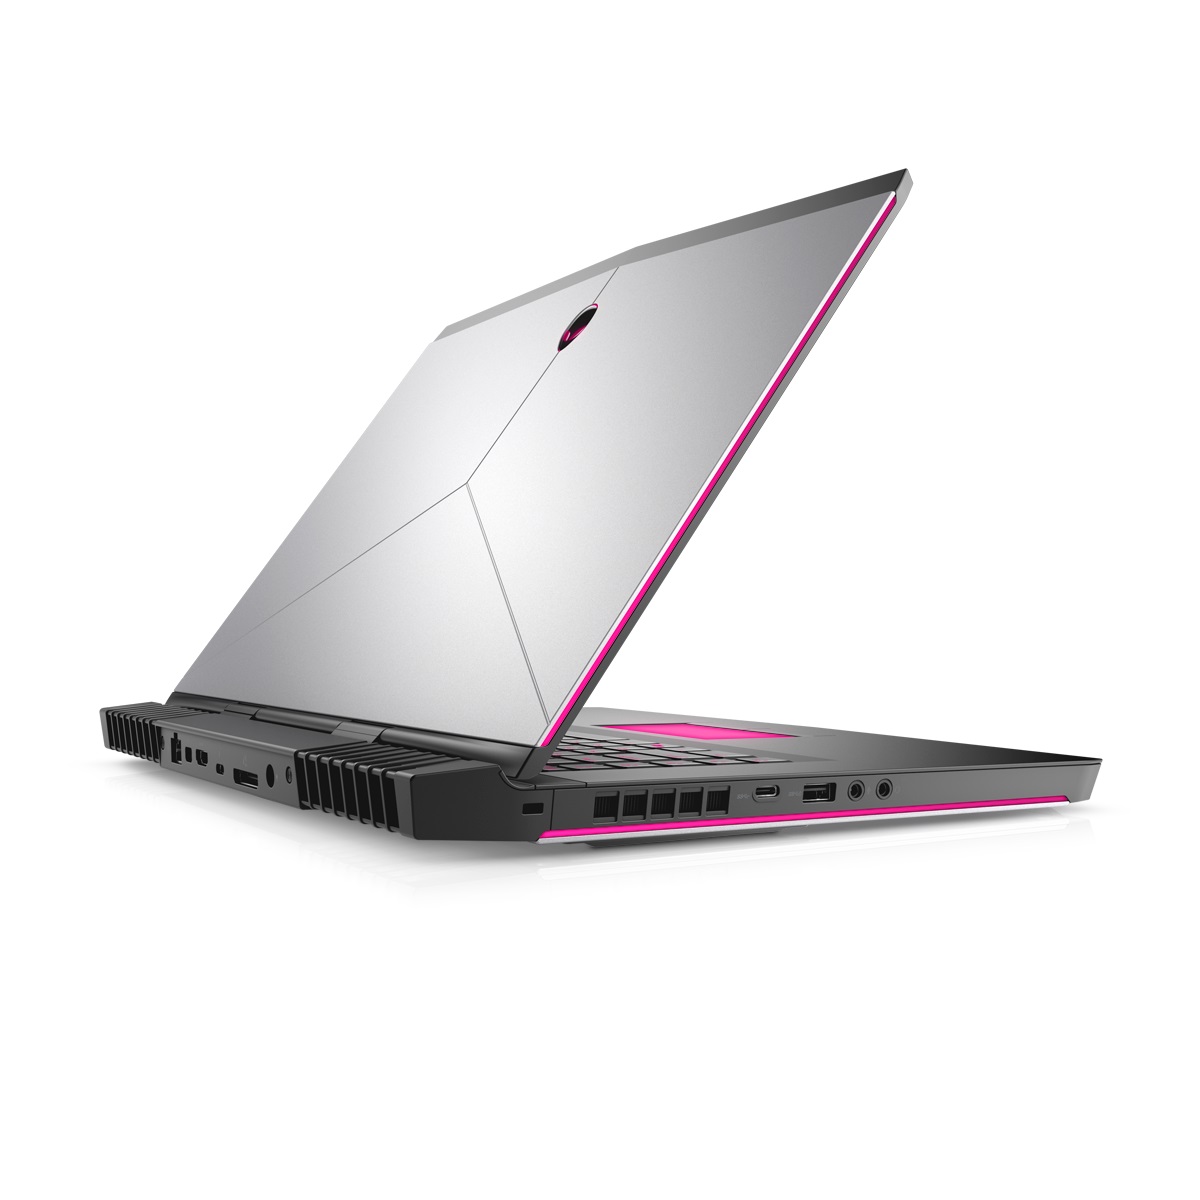 Dell and Alienware show off new and improved PC, software and gaming 1b988e3fa4aab86861b9bda5d4a15eab.jpg